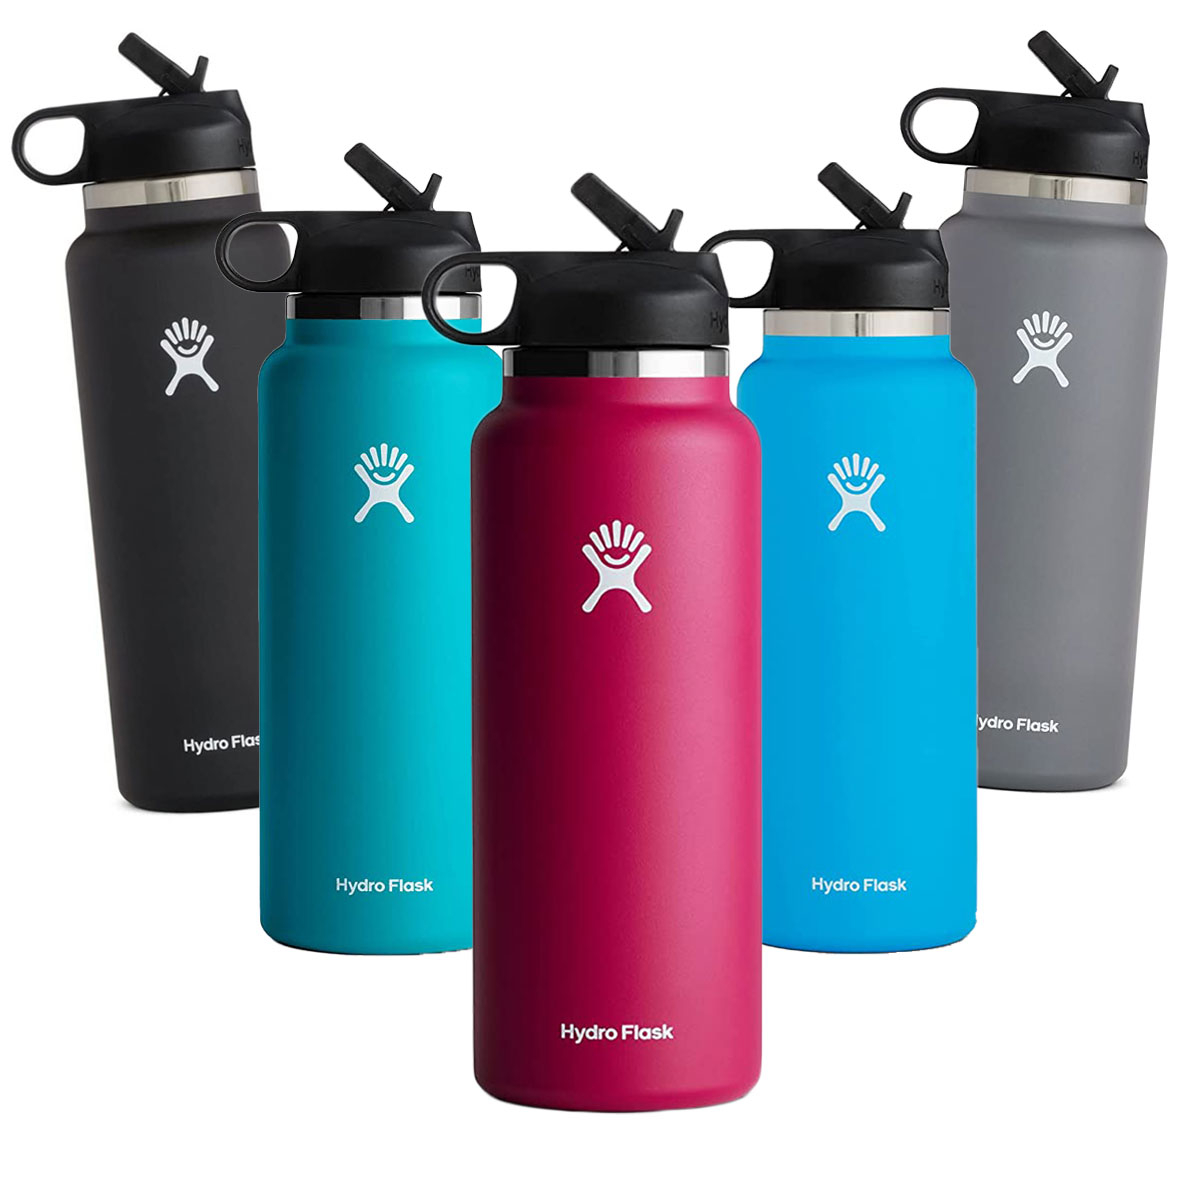 Hydro Flask: Sustainable & Refillable Water Bottles